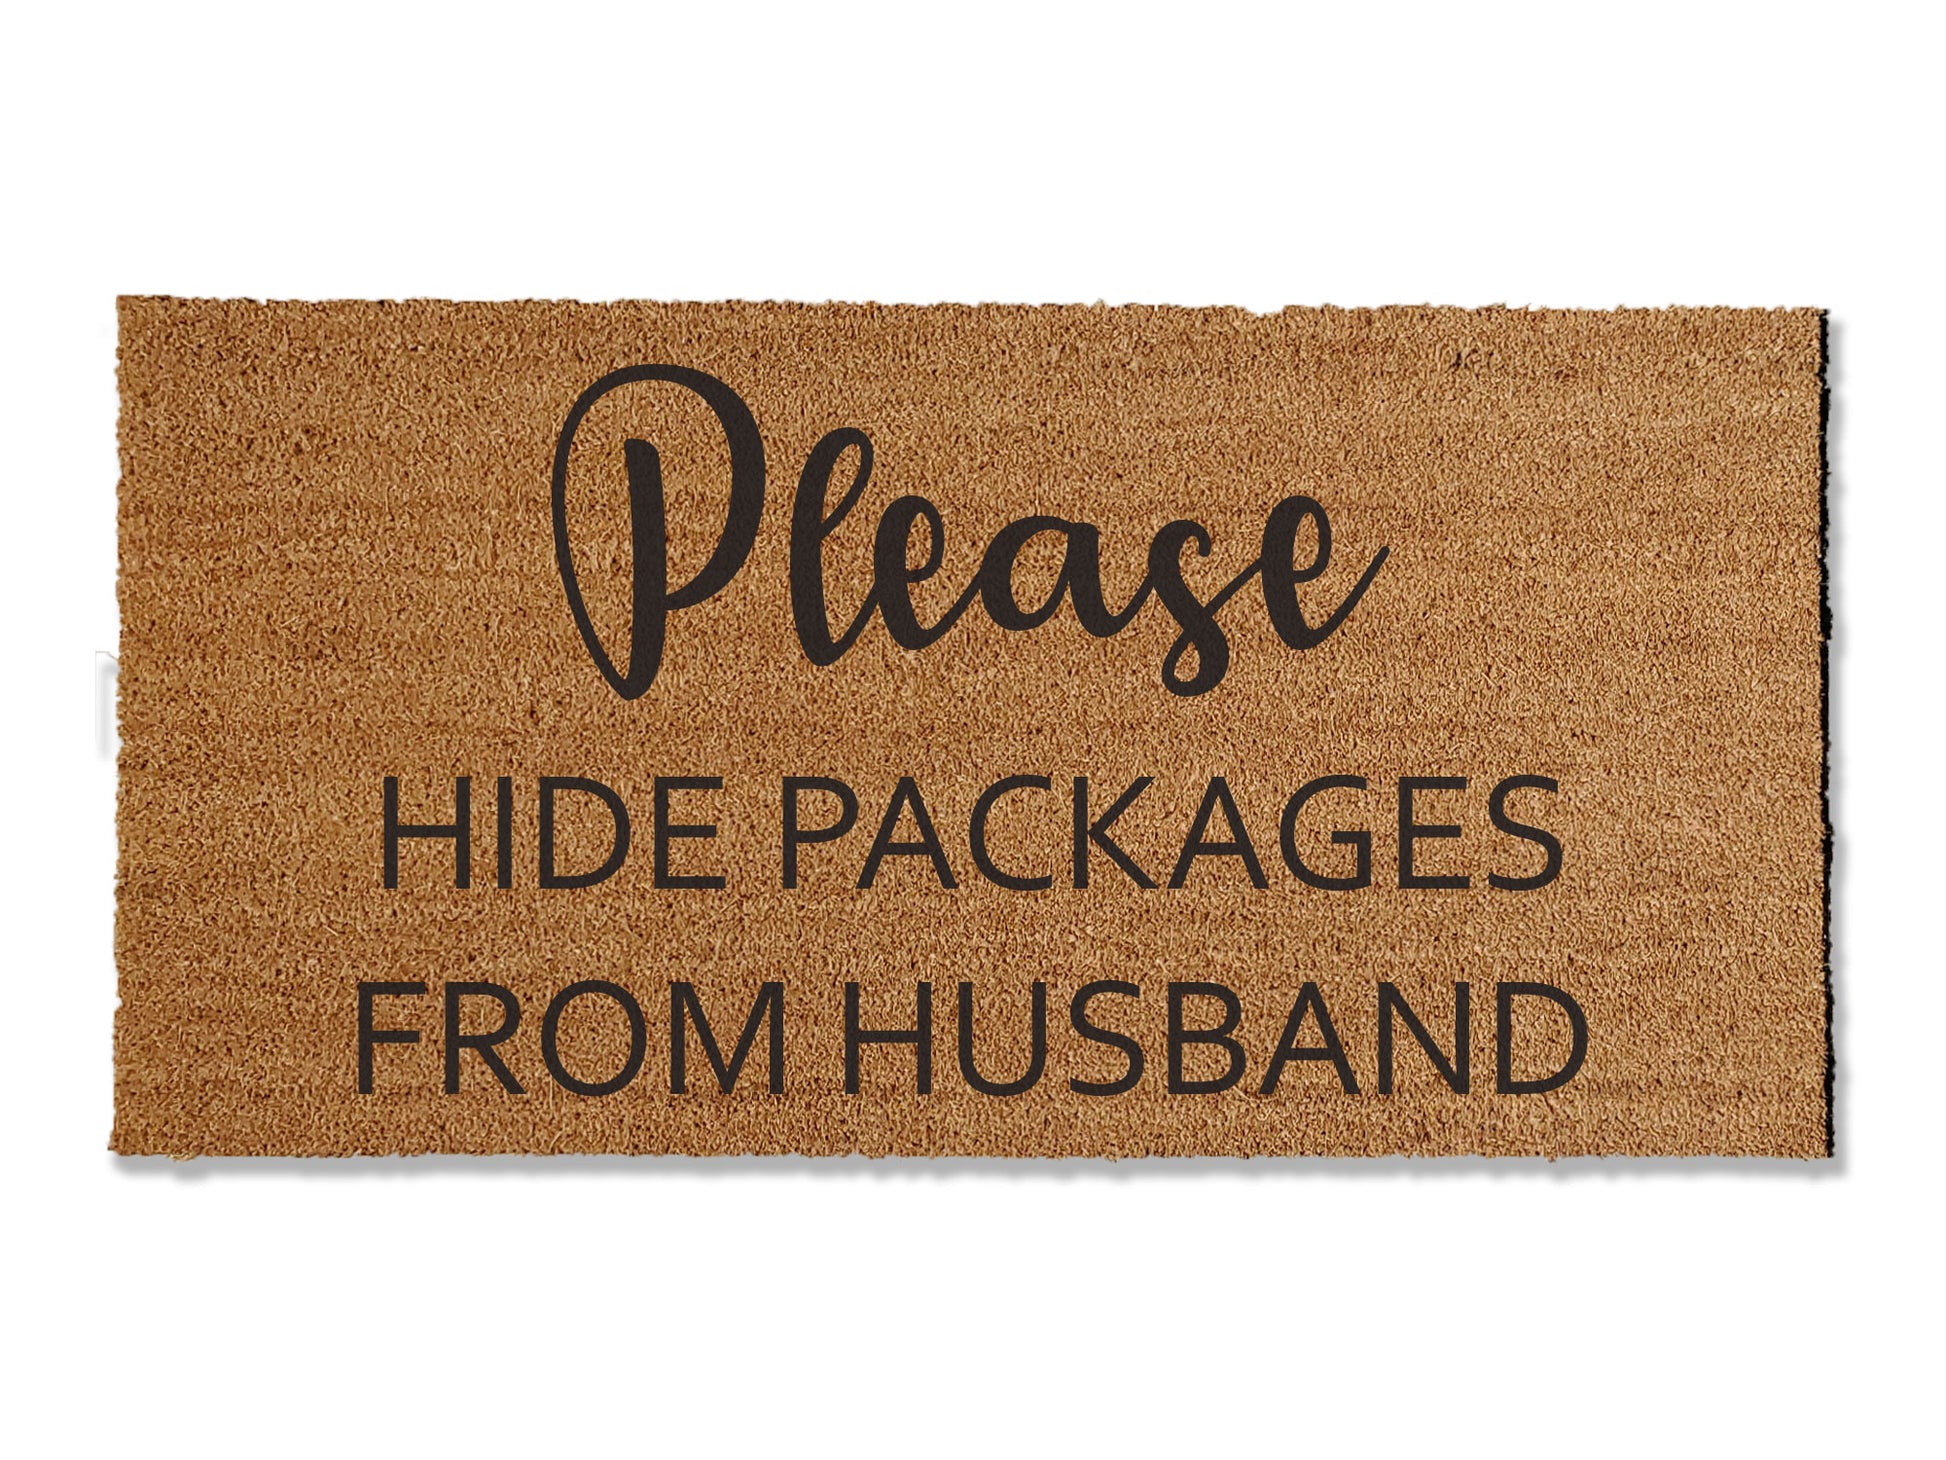 Coir doormat with the humorous message 'Please Hide Packages From Husband.' A funny and functional addition to your entryway, providing instructions to delivery drivers. Available in multiple sizes for personalized fit.